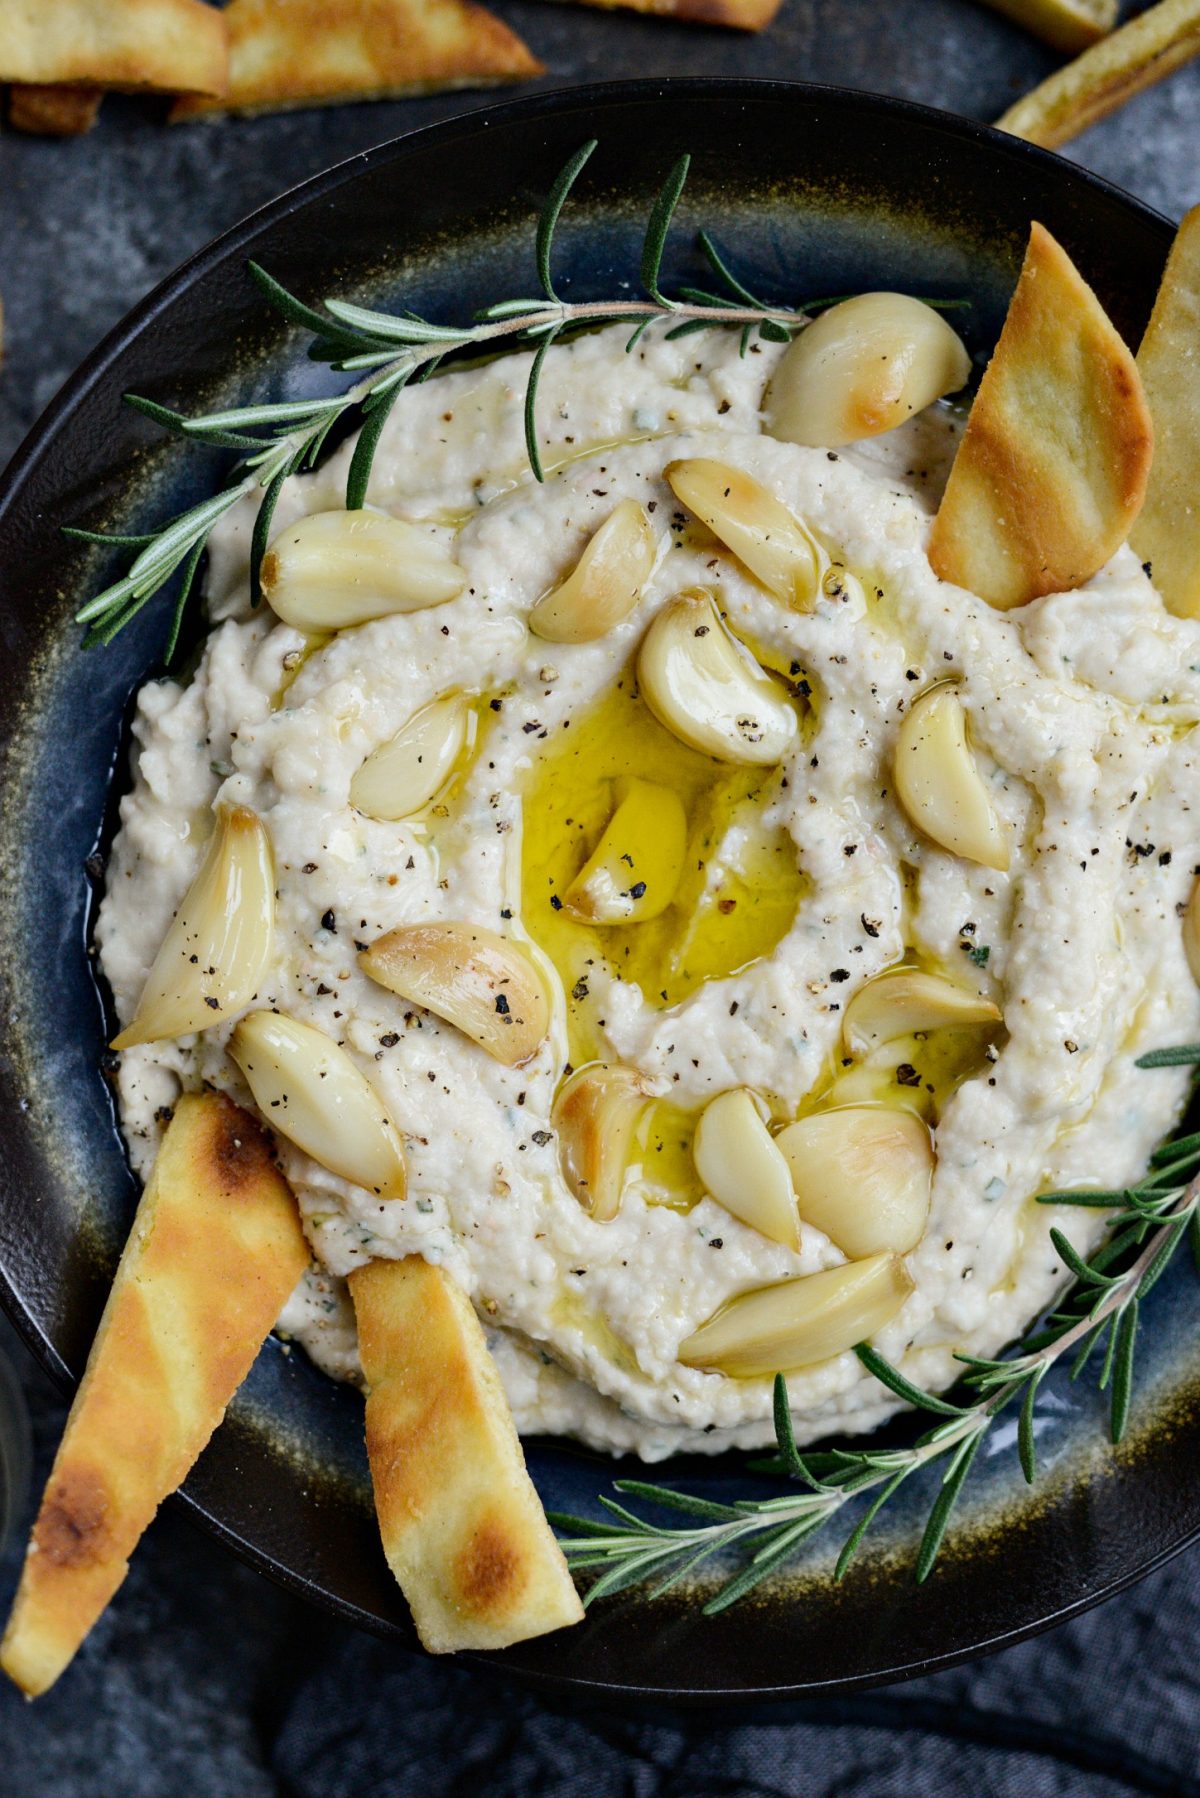 Roasted-Garlic-and-Rosemary-White-Bean-Dip-l-SimplyScratch.com-10-1200x1798.jpg